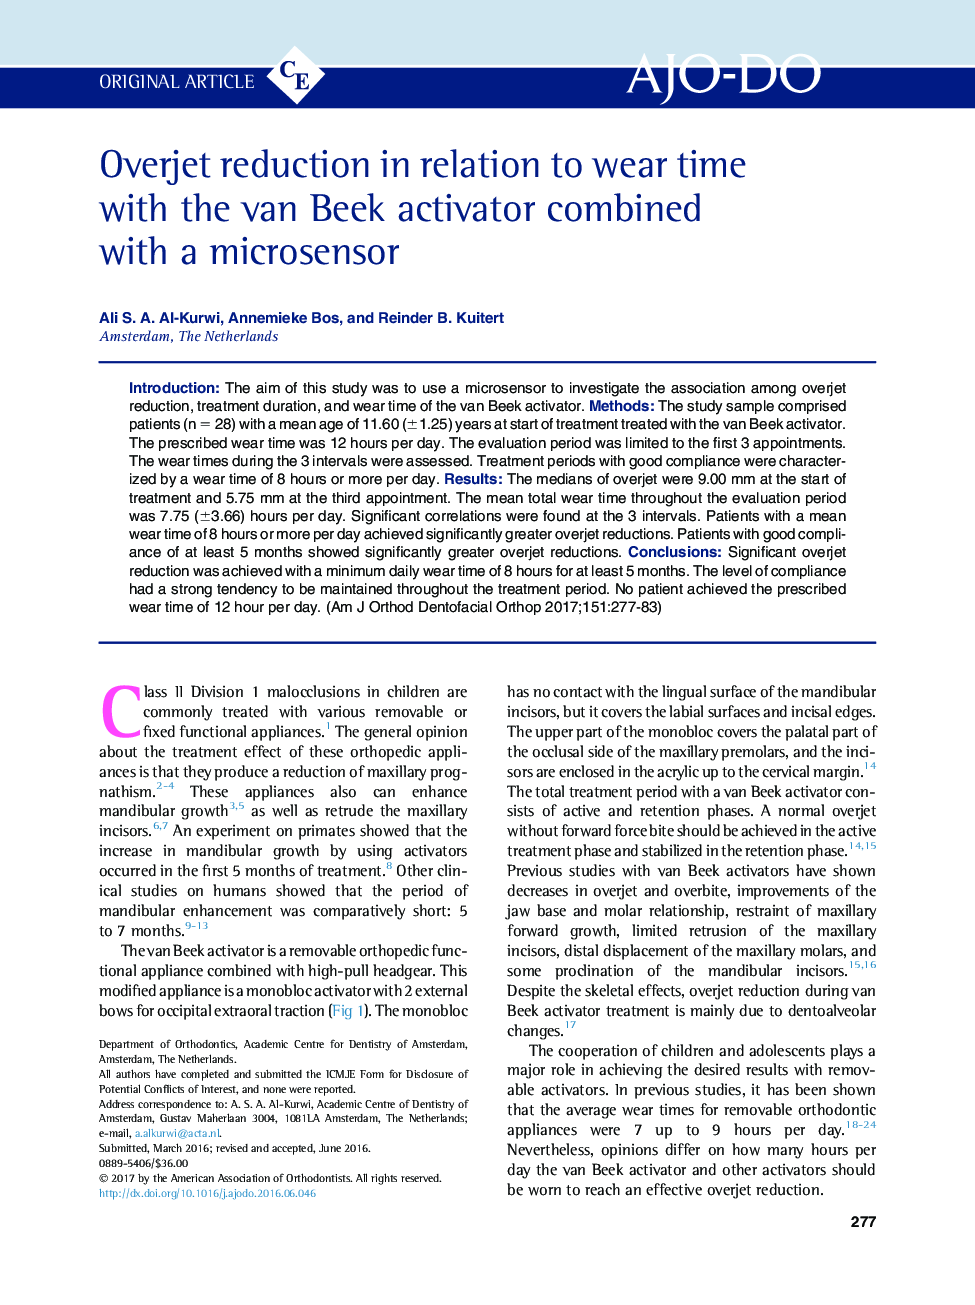 Overjet reduction in relation to wear time with the van Beek activator combined with a microsensor